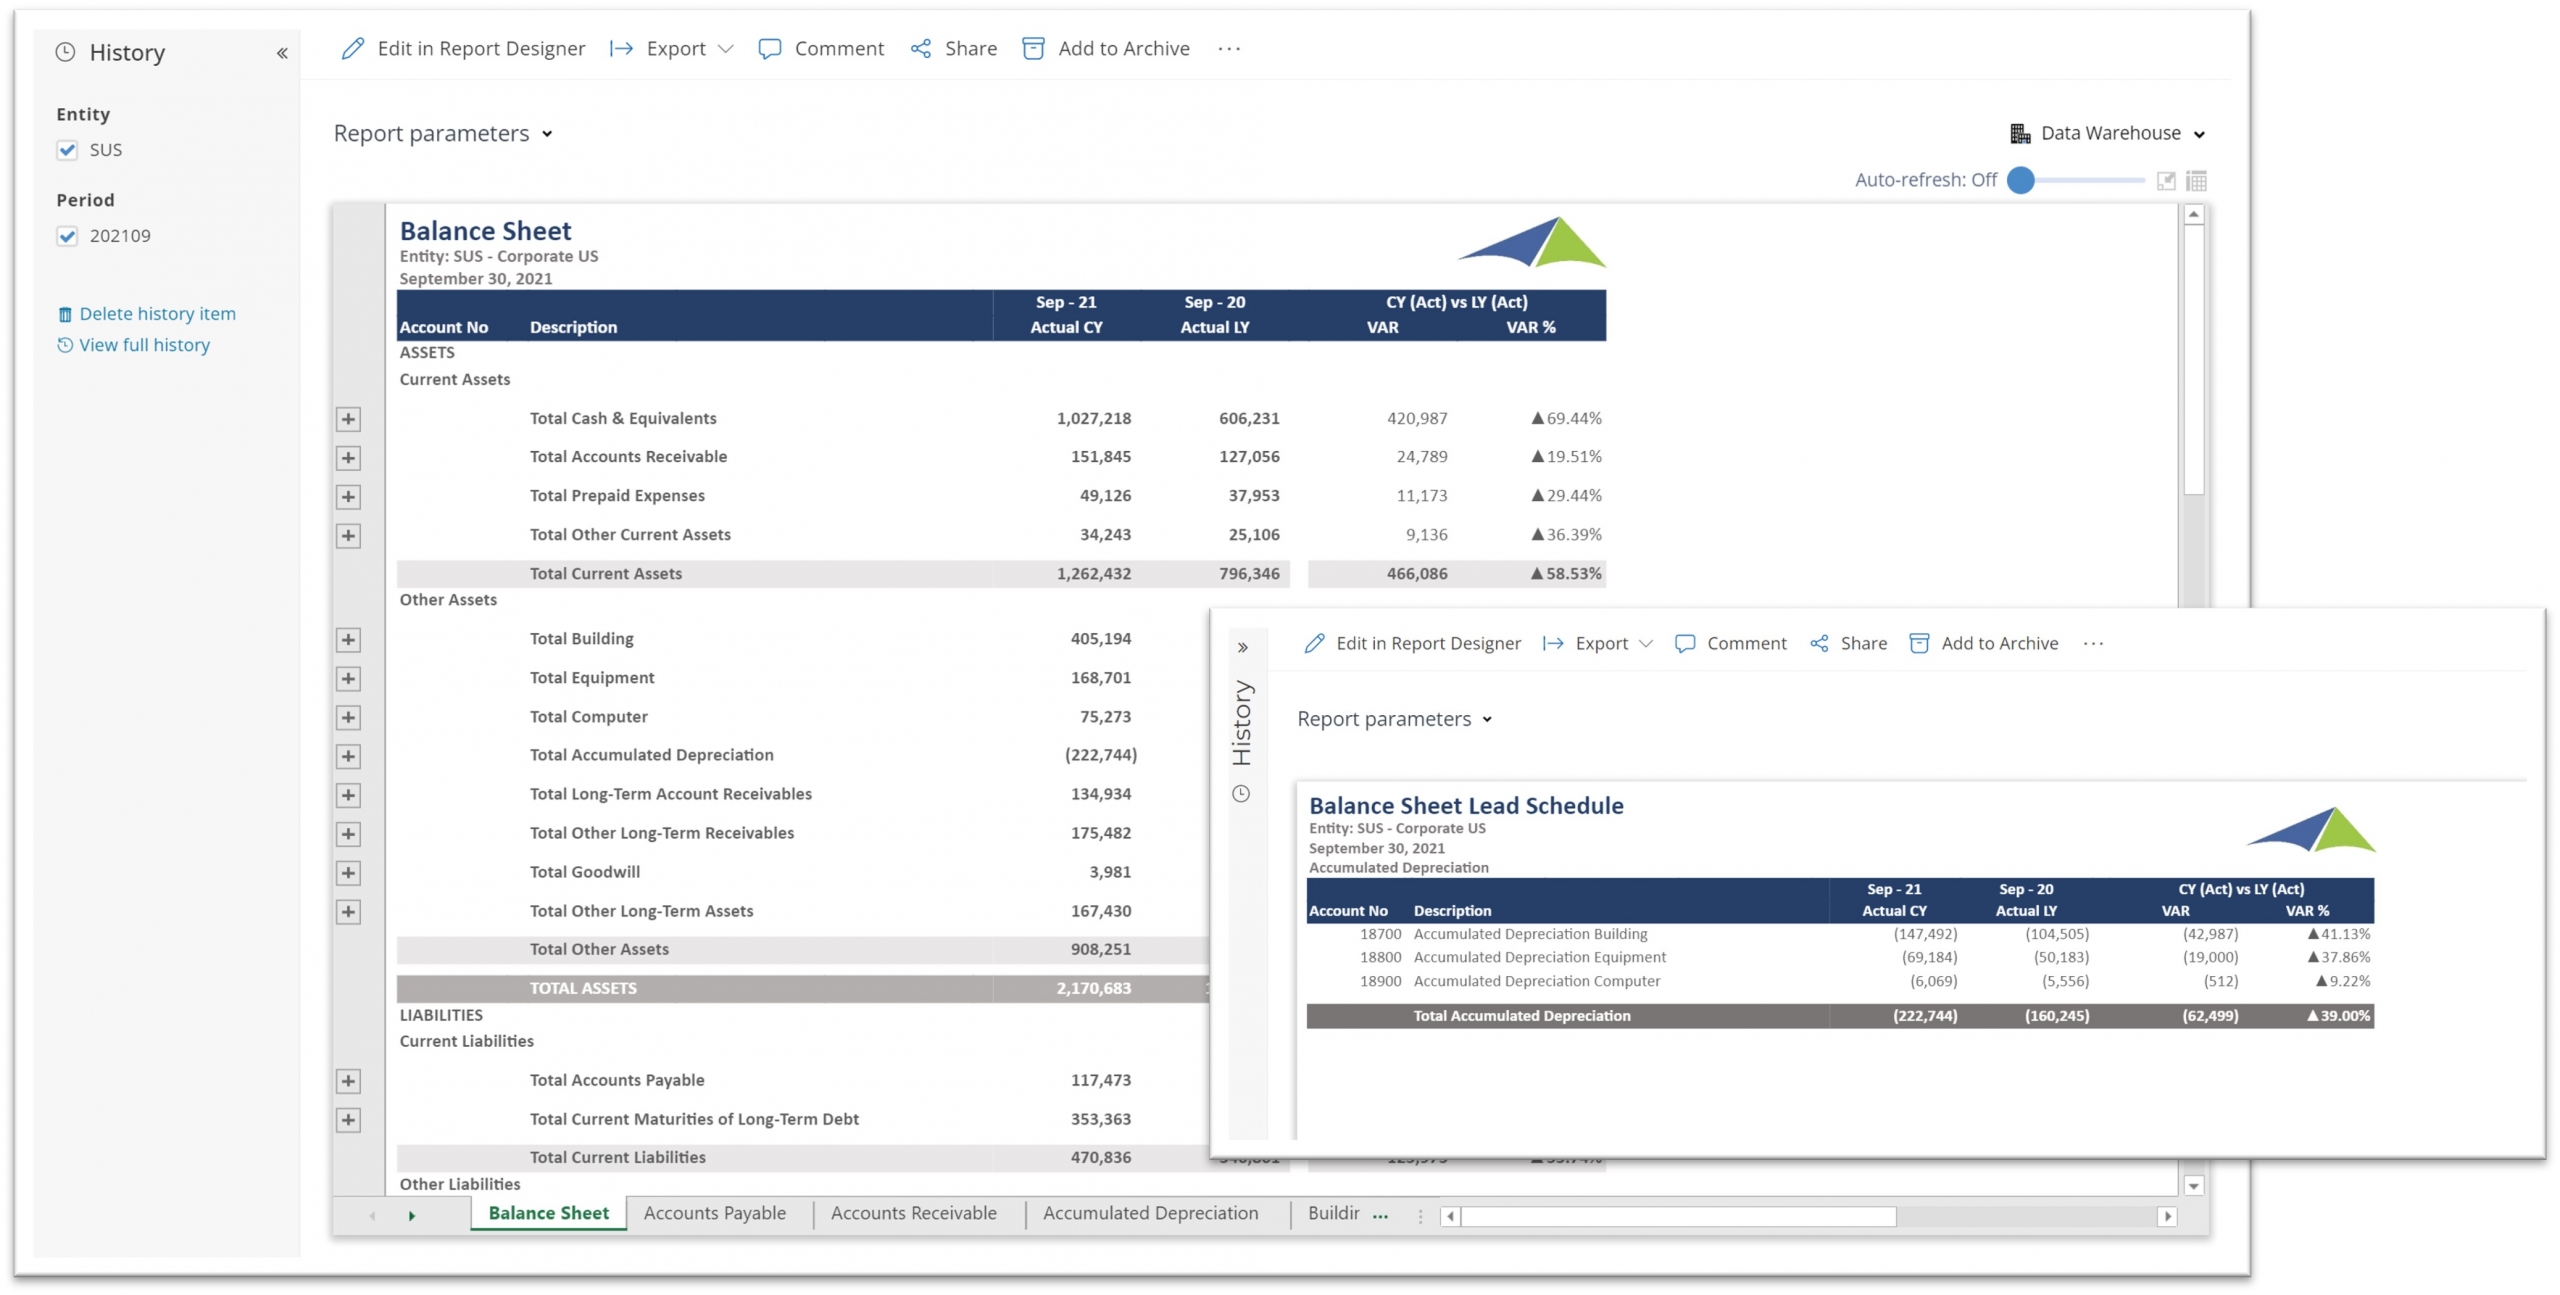 Example of a Balance Sheet Lead Schedule Report to Streamline the Month End Close Process